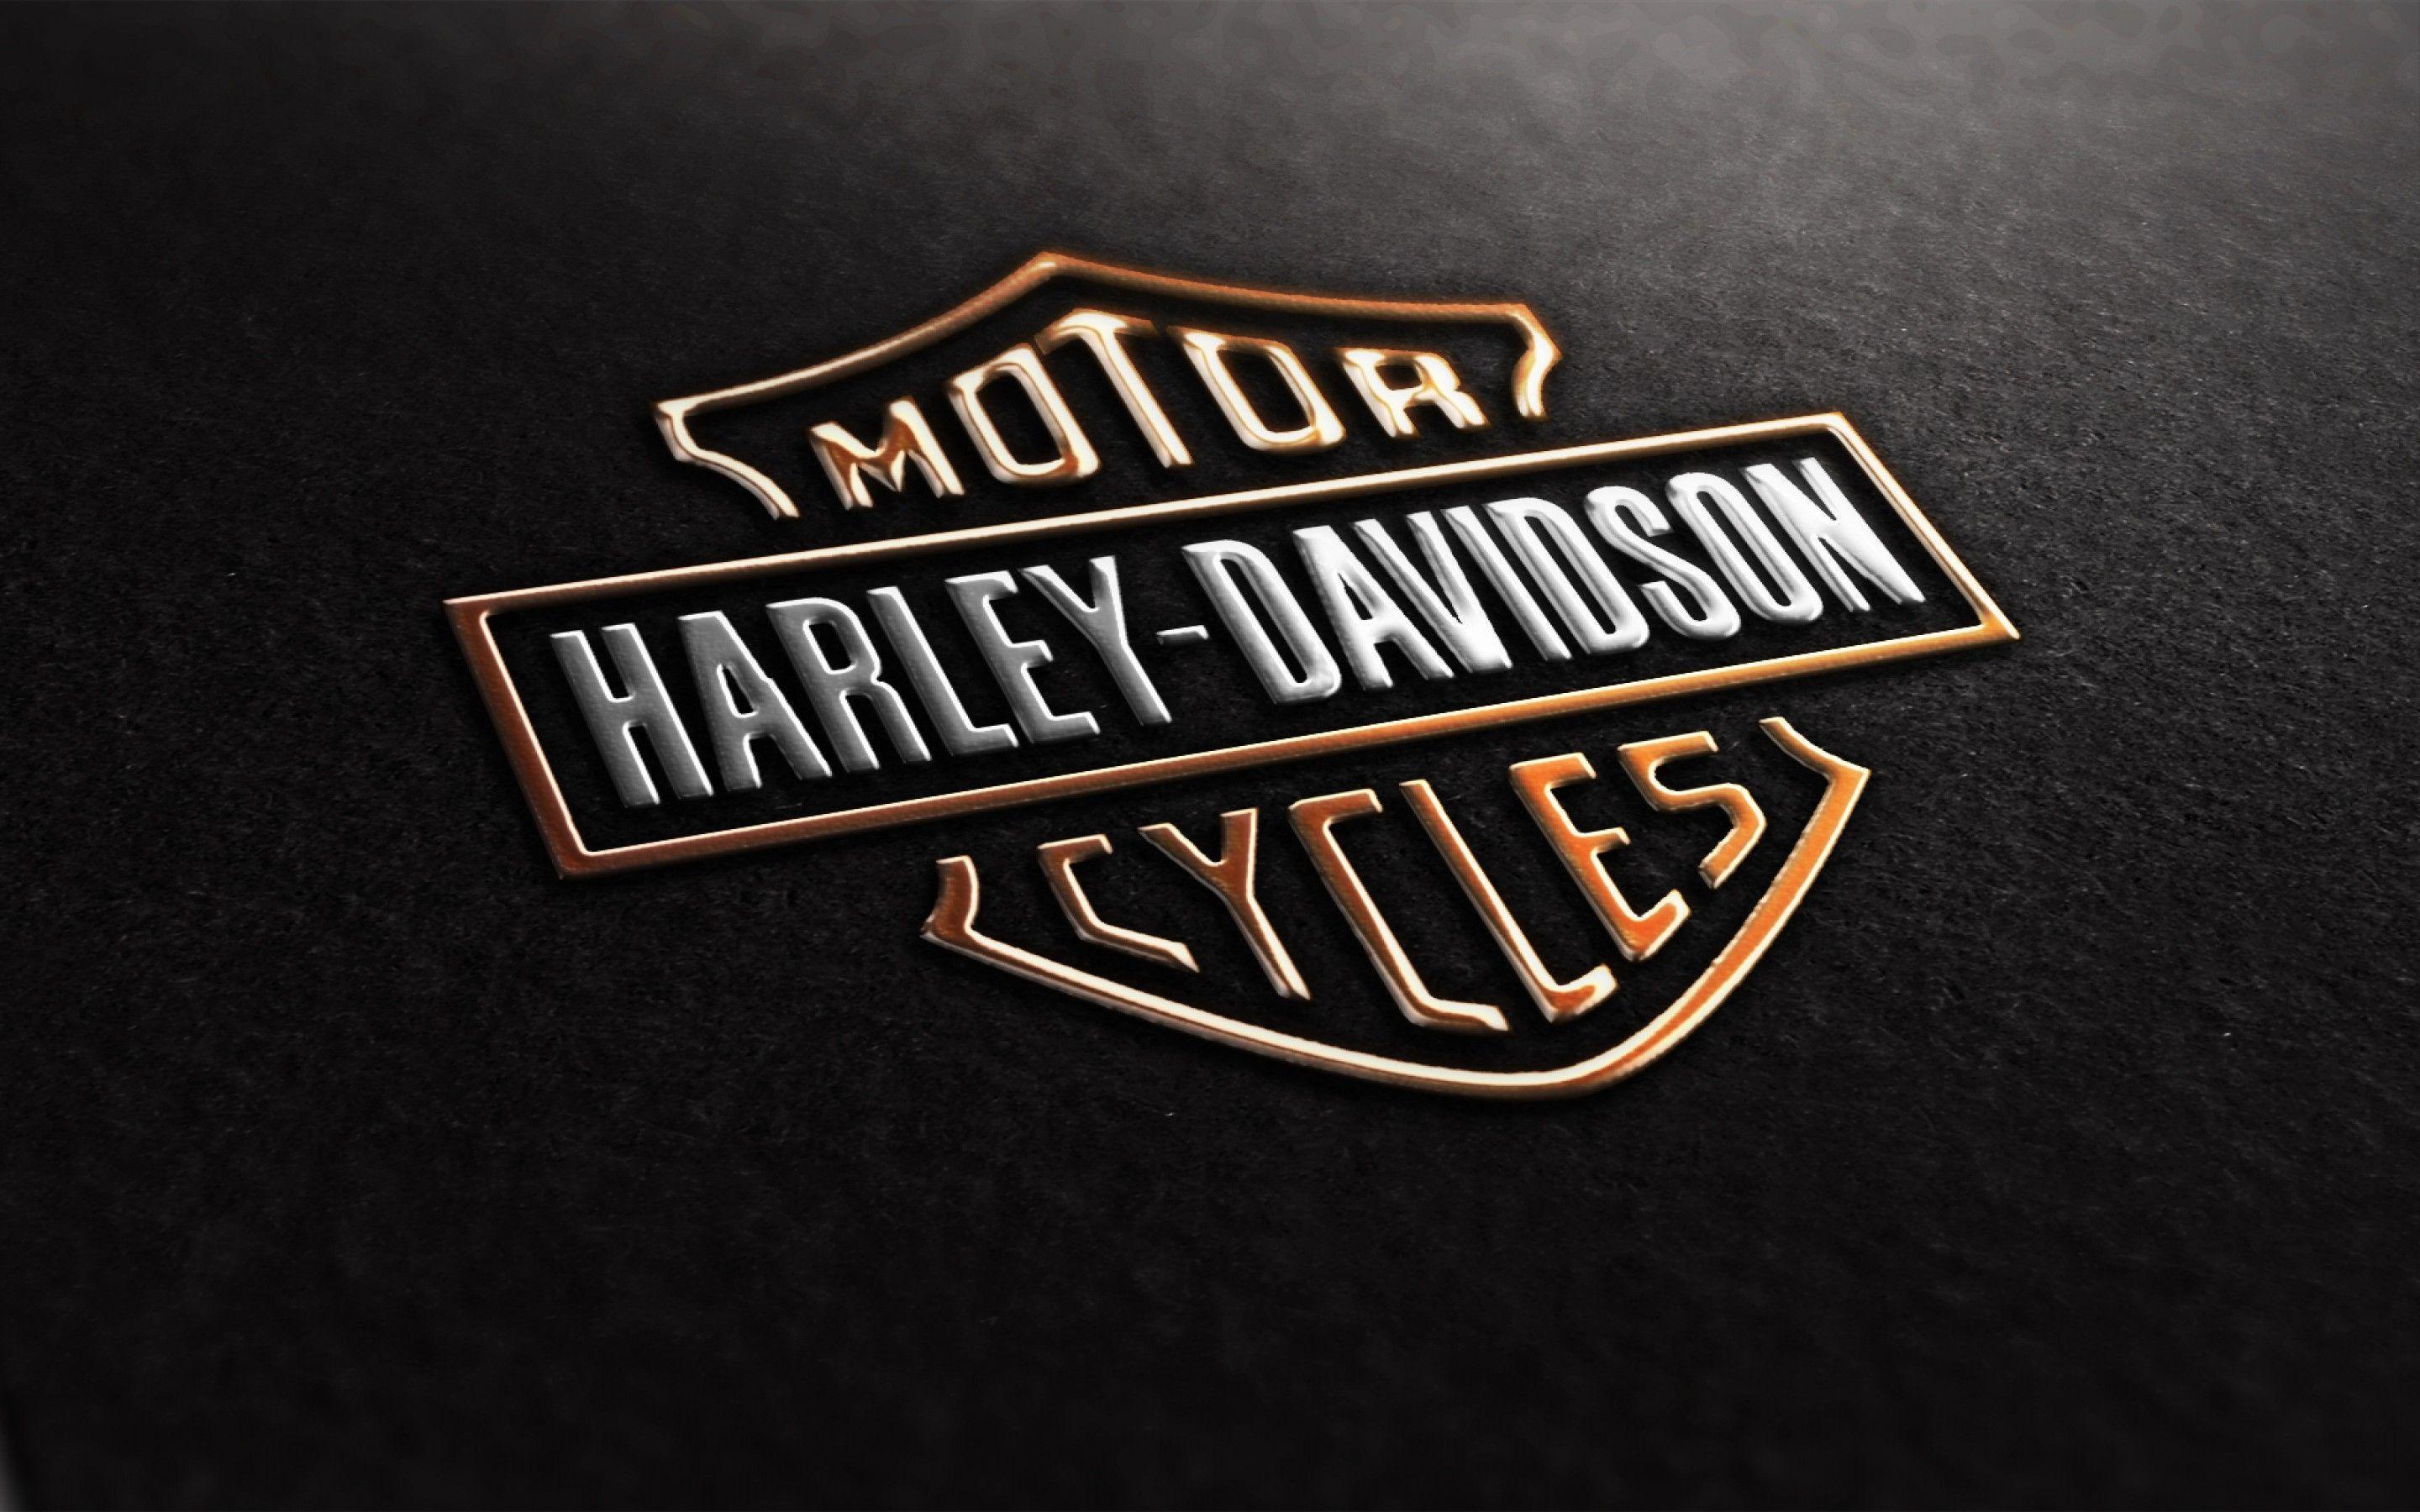 Harley Davidson Logo Wallpapers Hd Backgrounds Wallpapers 19 HD